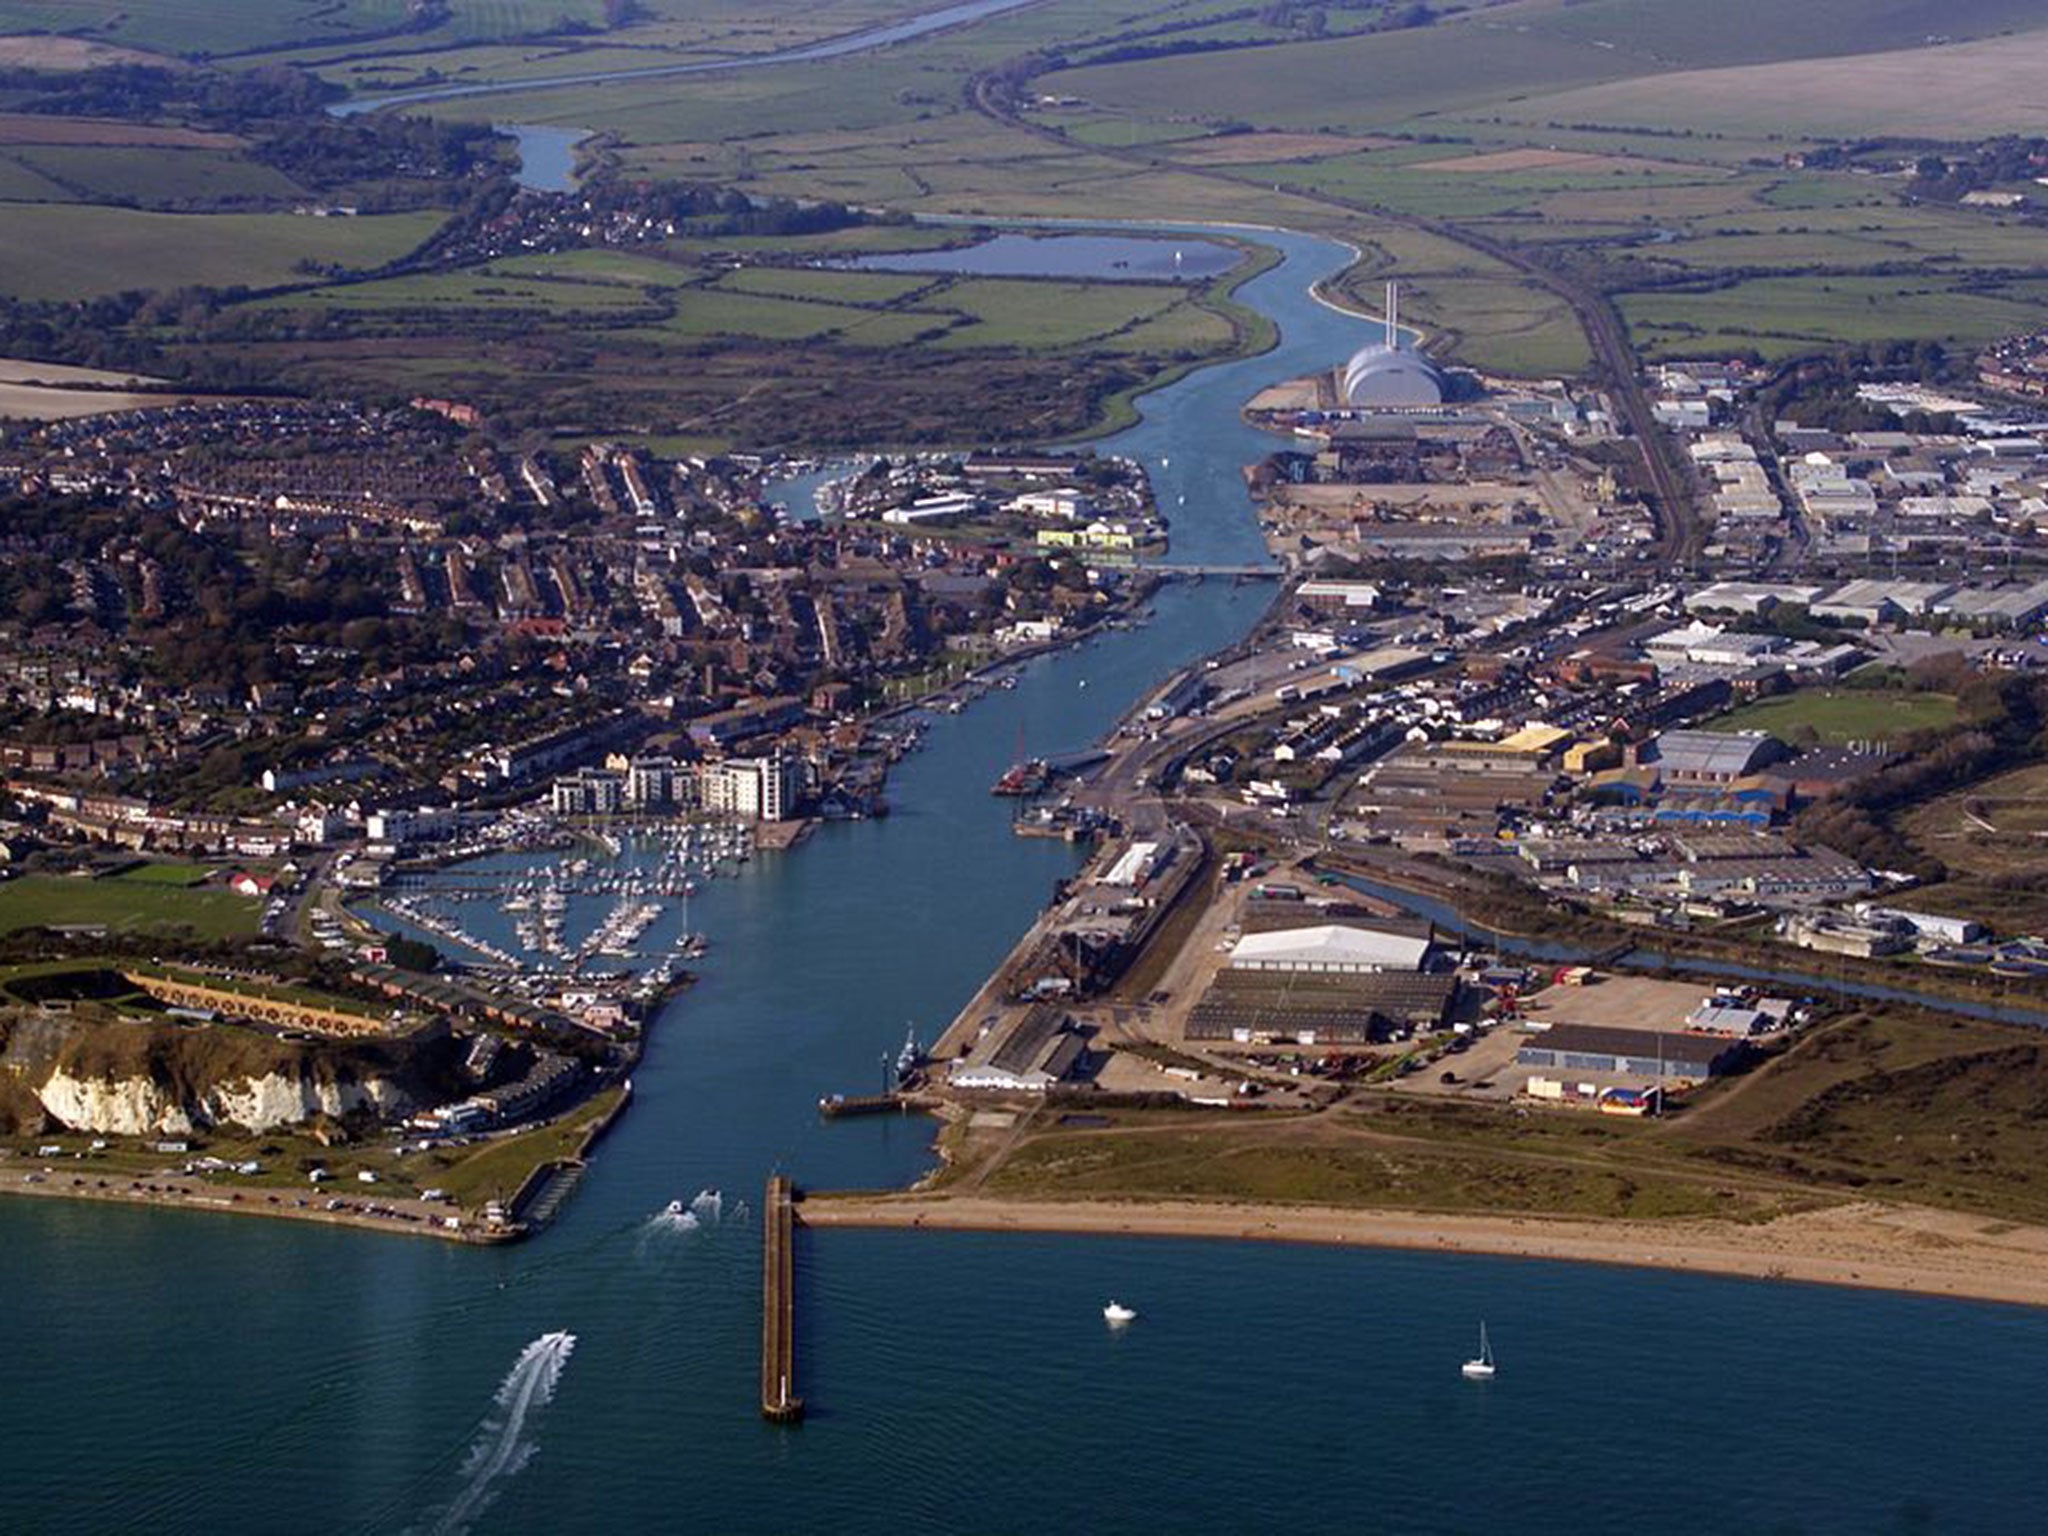 The River Ouse in Newhaven, where a man tried to take his life